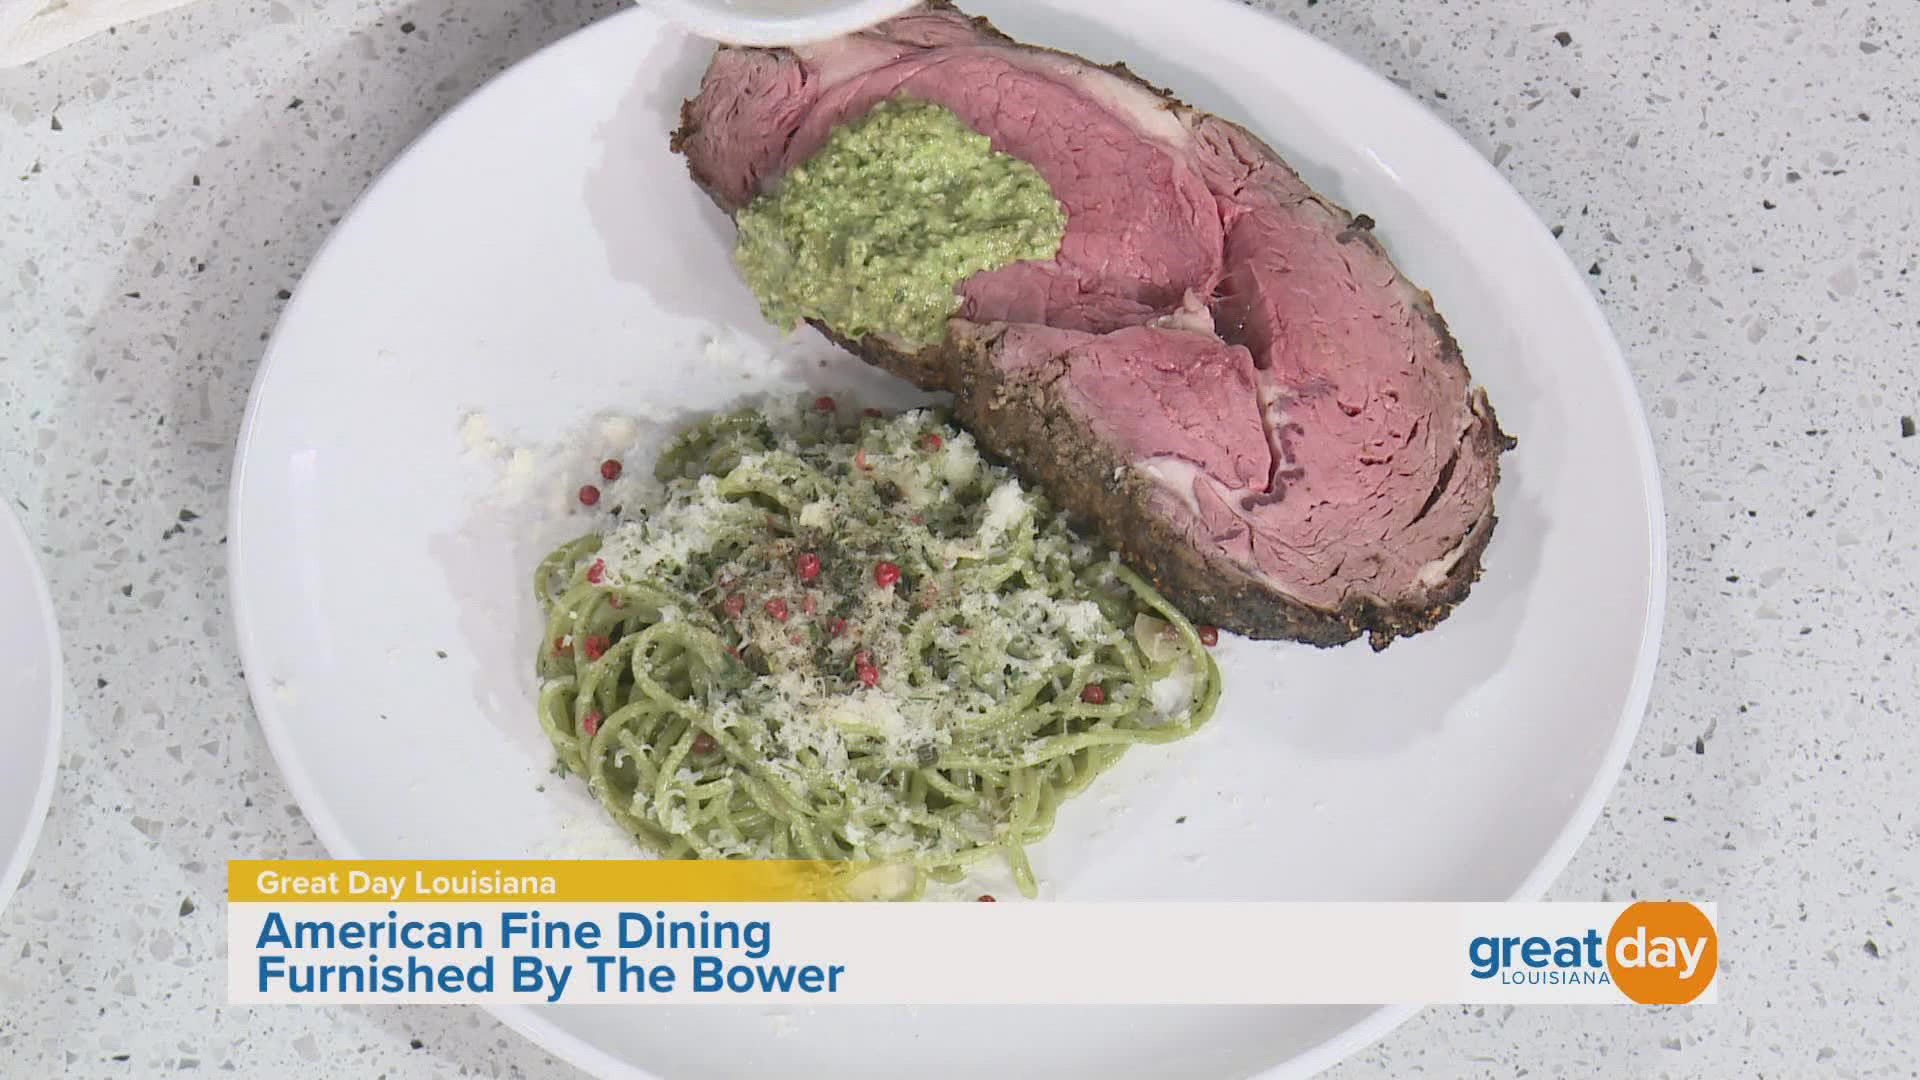 The Bower is serving up a special Prime Rib menu on Thursday nights and we got a taste in the Winn-Dixie kitchen.